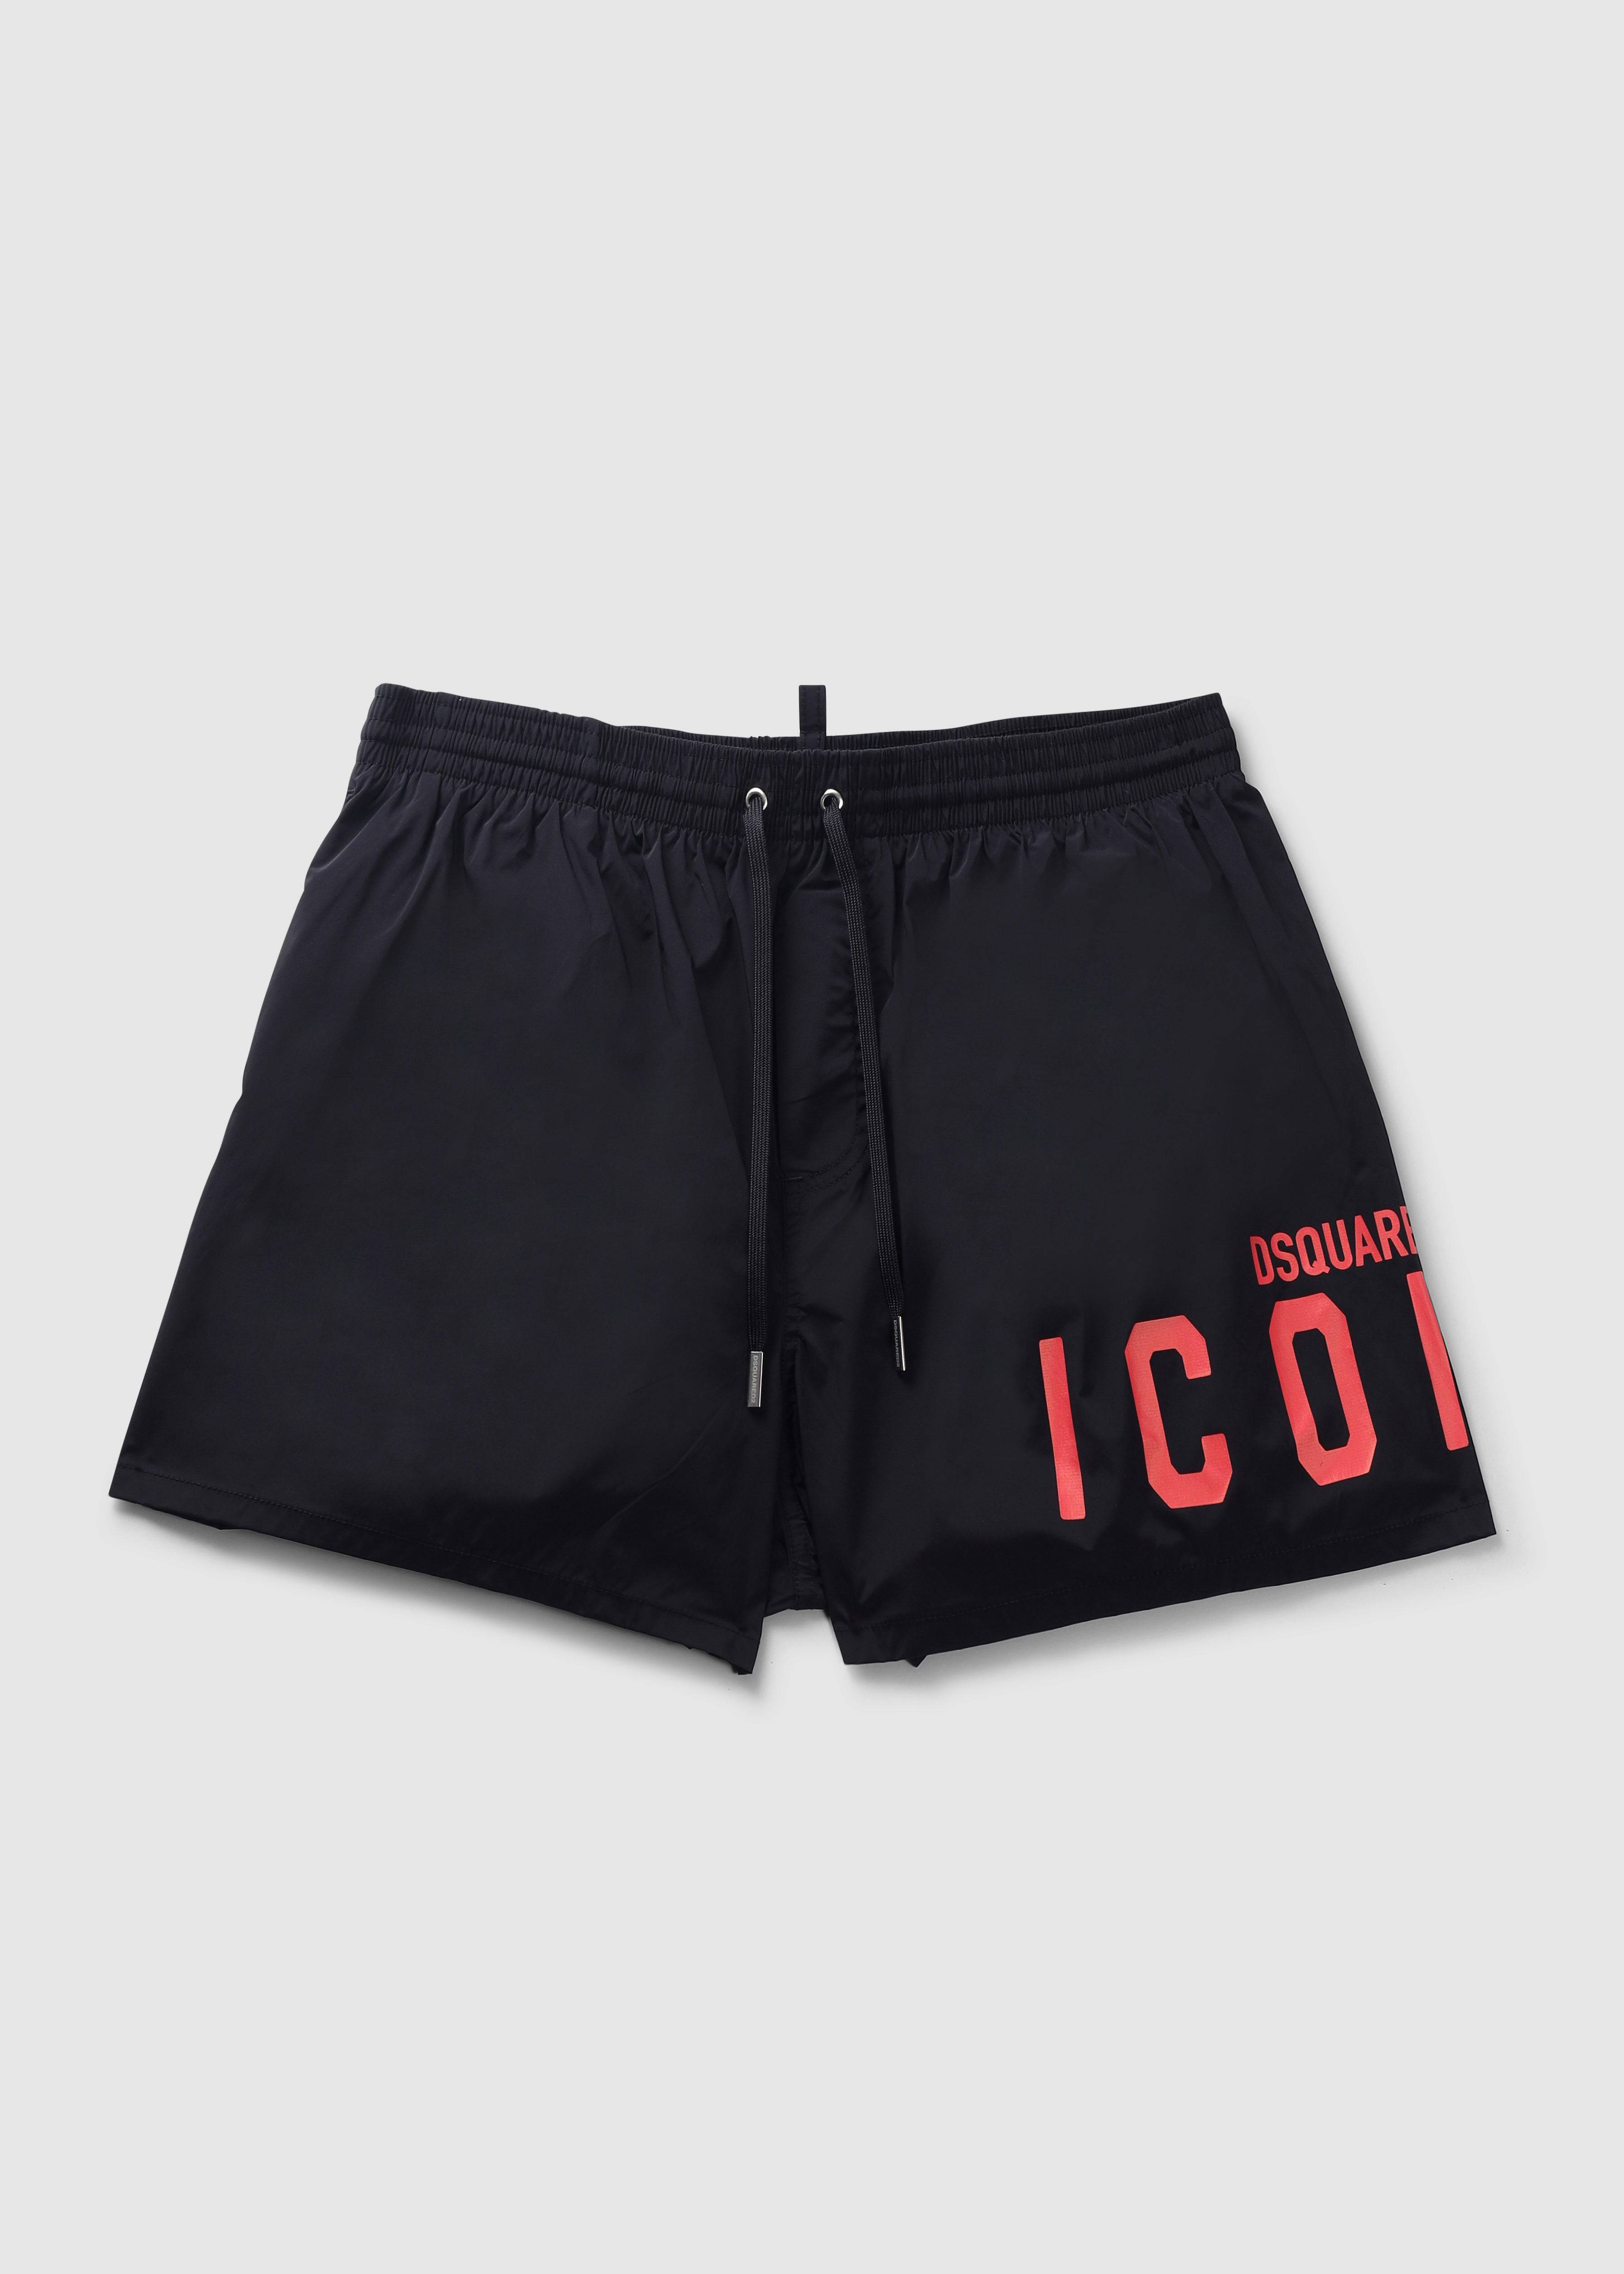 Image of Dsquared2 Mens Icon Swim Shorts In Black/Red